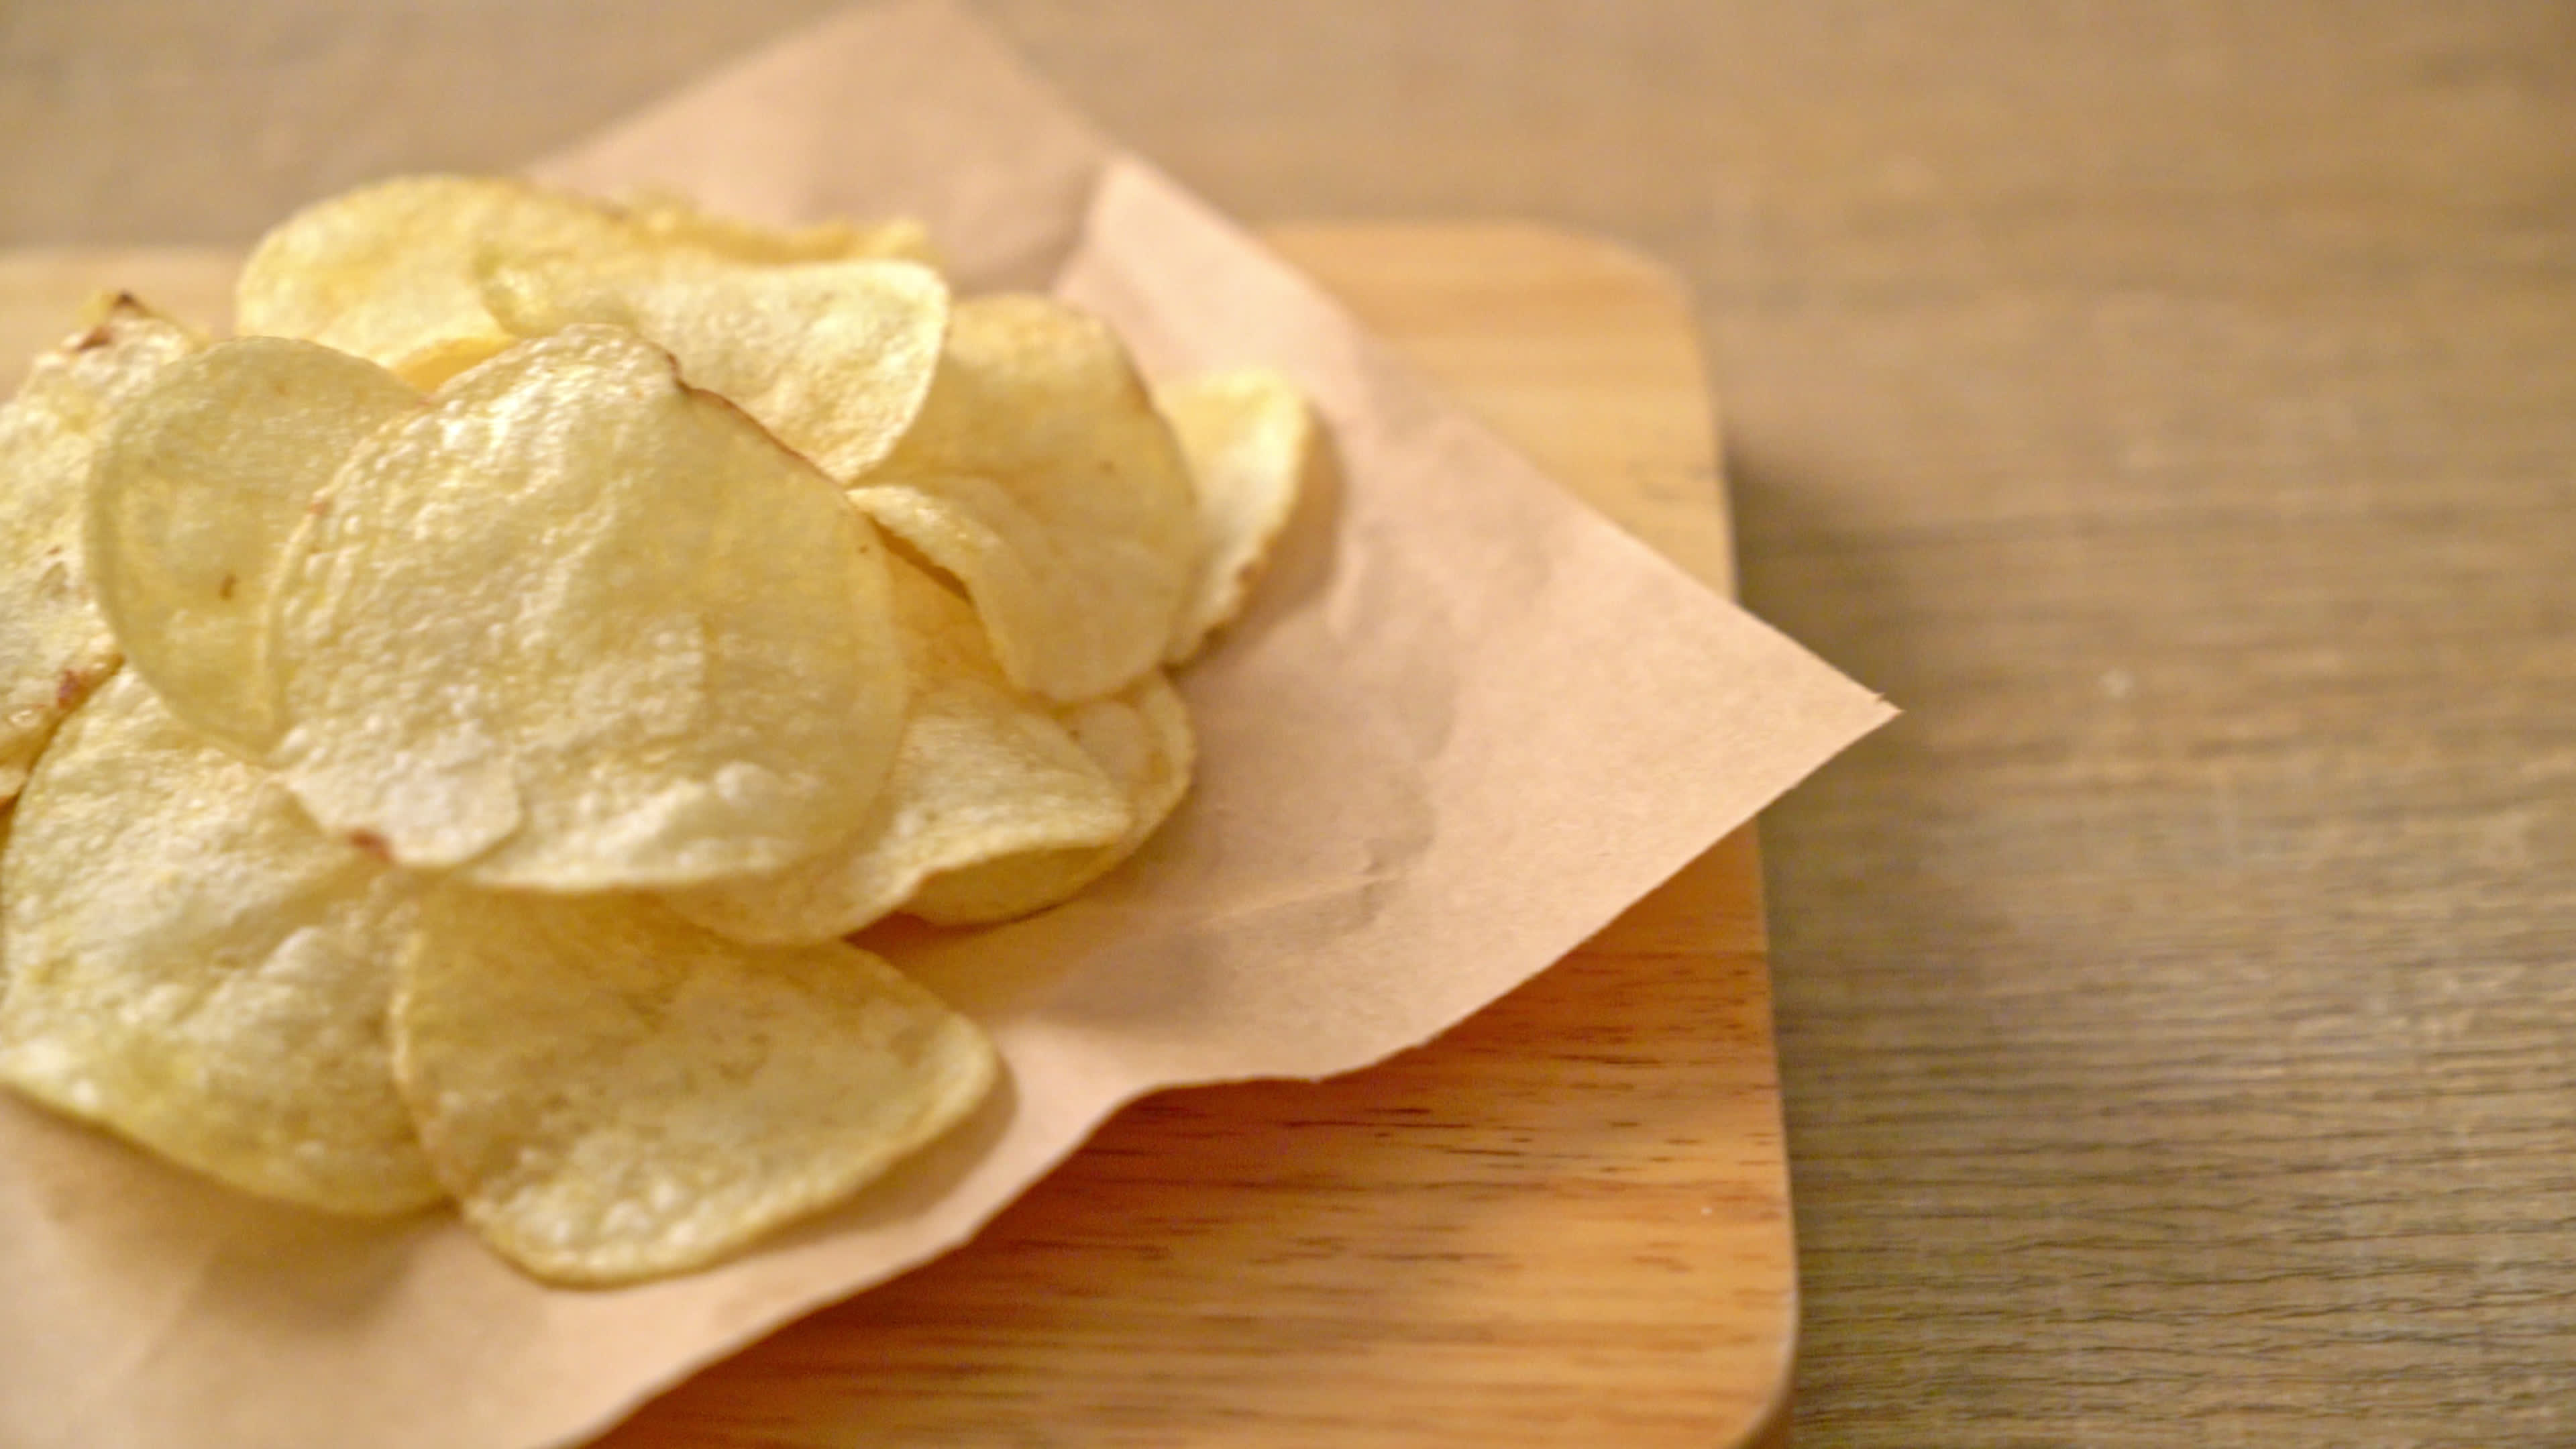 Potato chips with dipping sauce, Delicious combination, Stock video footage, Perfect for sharing, 3840x2160 4K Desktop